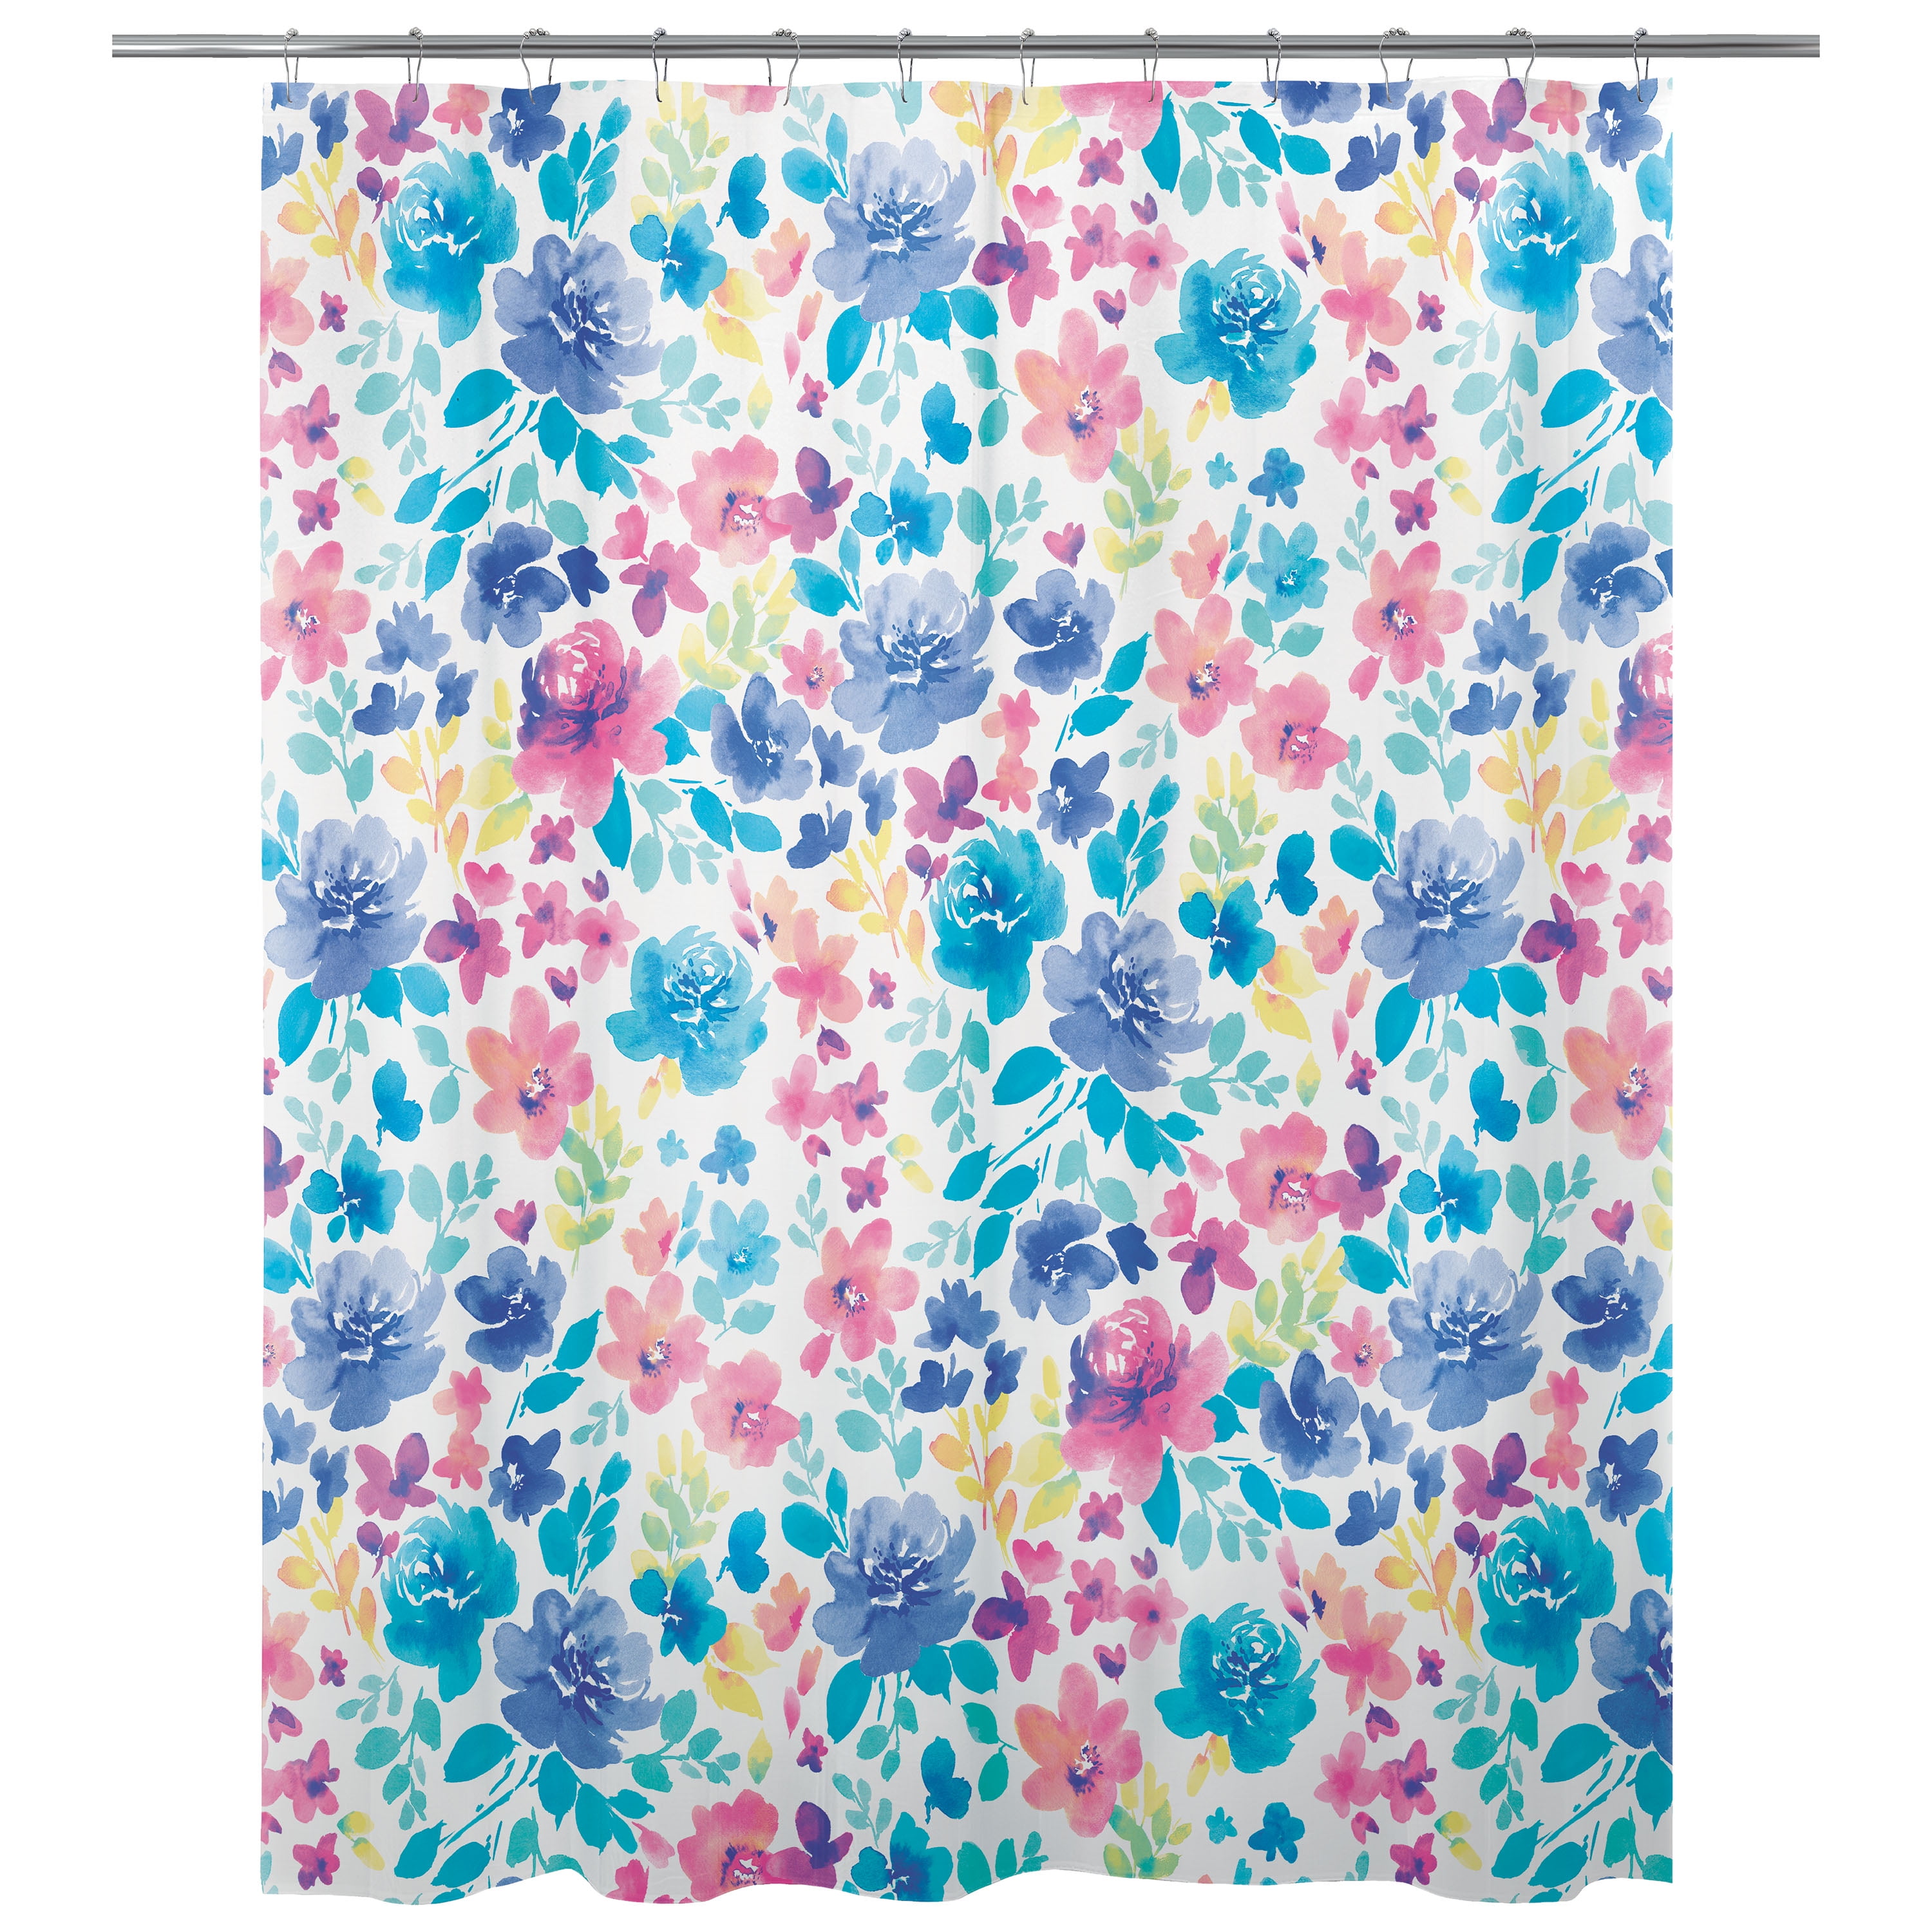 InterestPrint Bathroom Shower Curtain 60in x 72in with bright colorful flowers